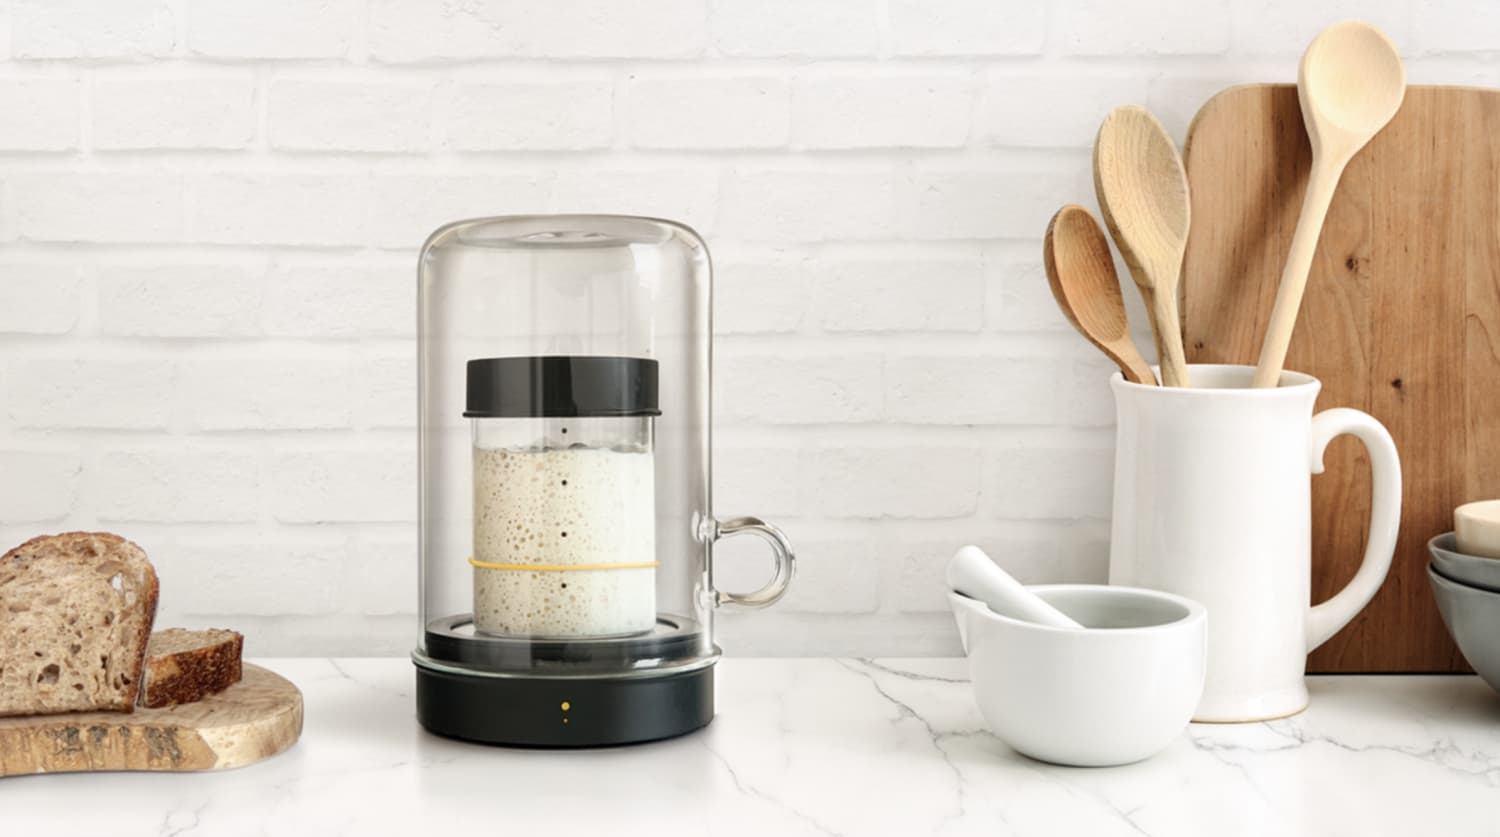 I Never Thought Making Sourdough Could be So Simple (and Stress-Free!) Until I Found this Gorgeous Gadget